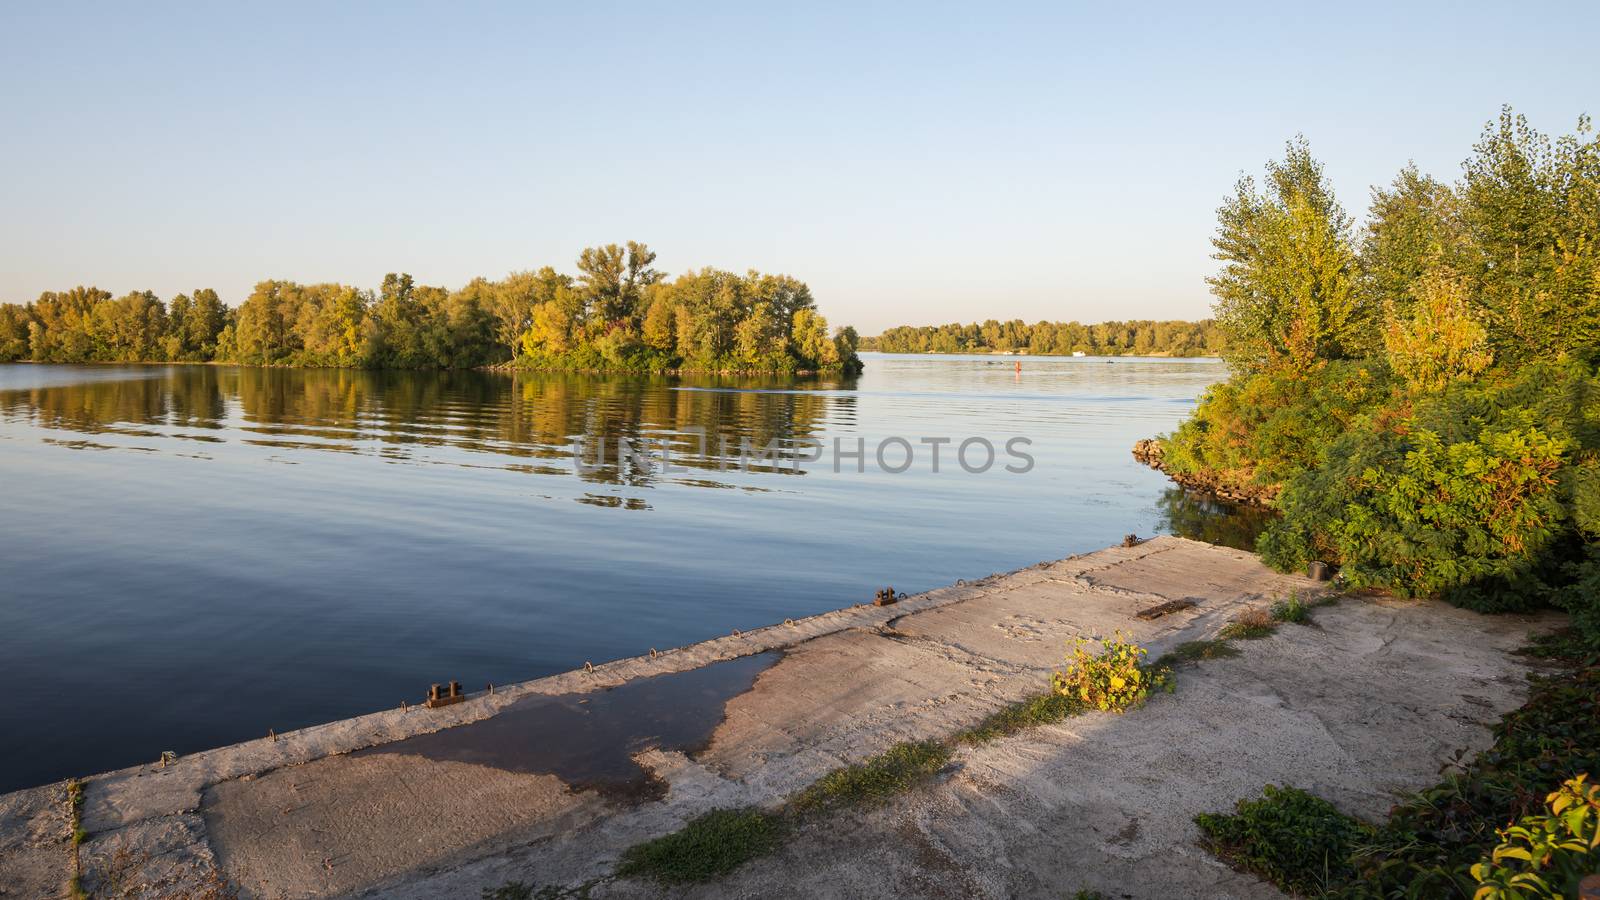 Landing stage on the Dnieper river in the Obolon district of Kiev, Ukraine, during a sunny summer evening